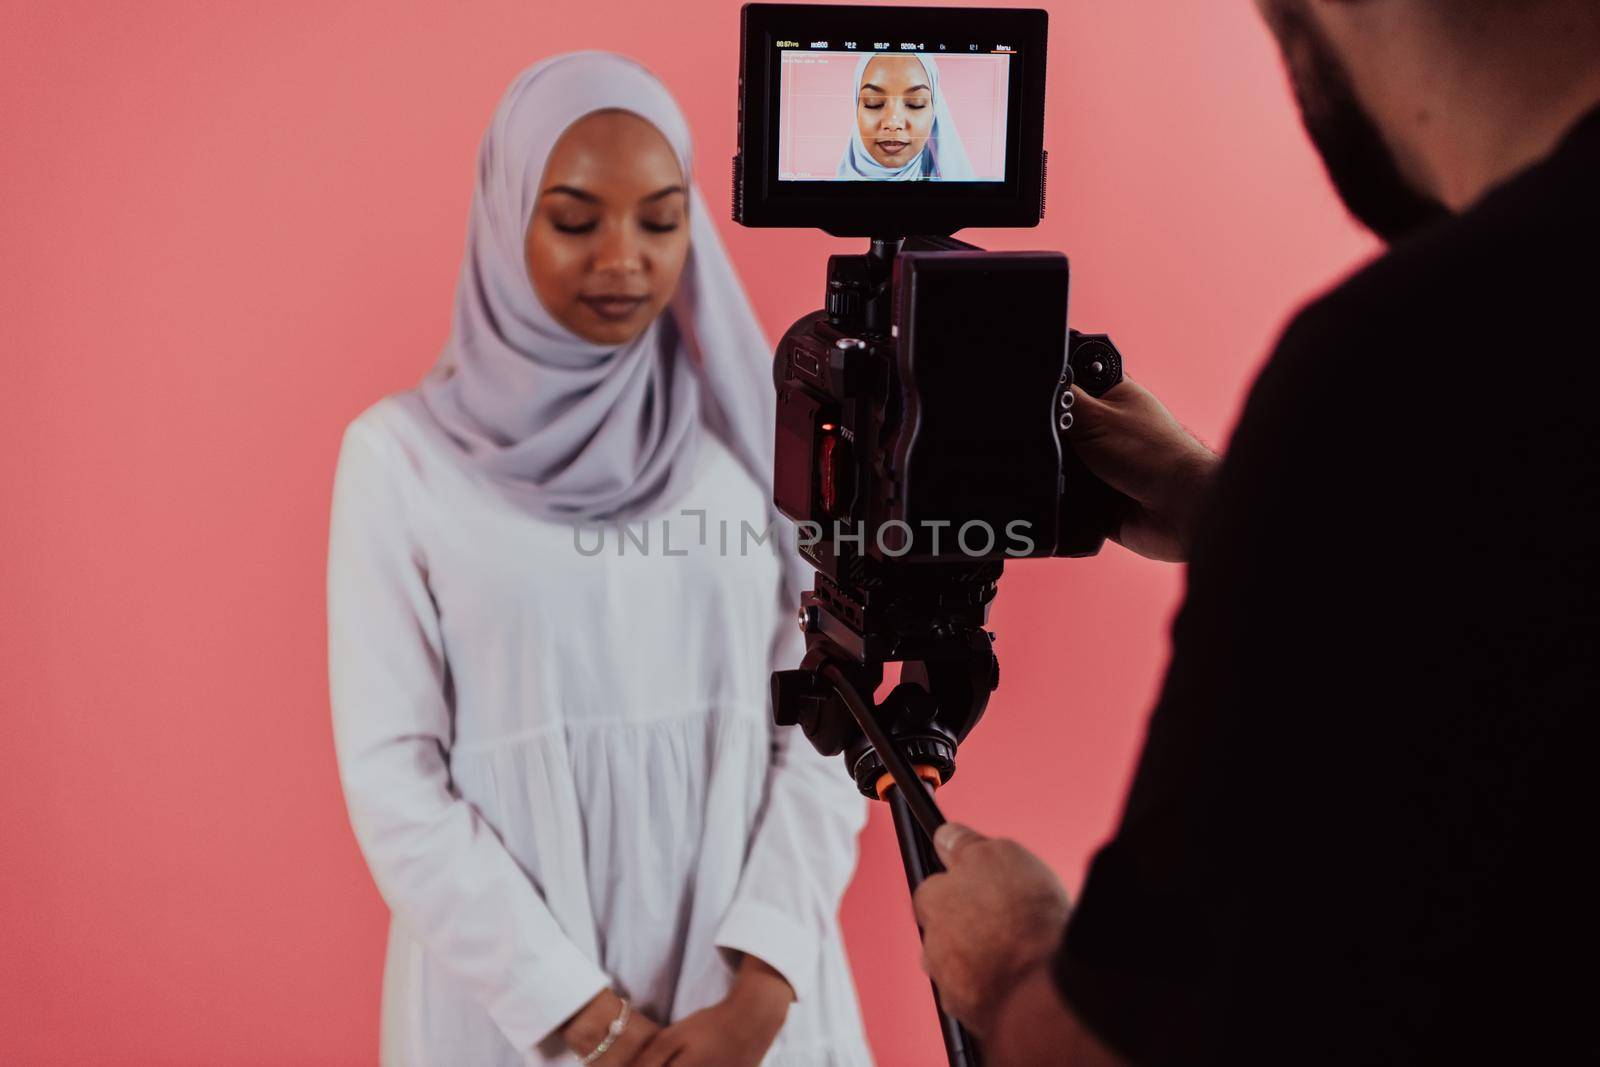 Videographer in digital studio recording video on professional camera by shooting female Muslim woman wearing hijab scarf plastic pink background. High-quality photo